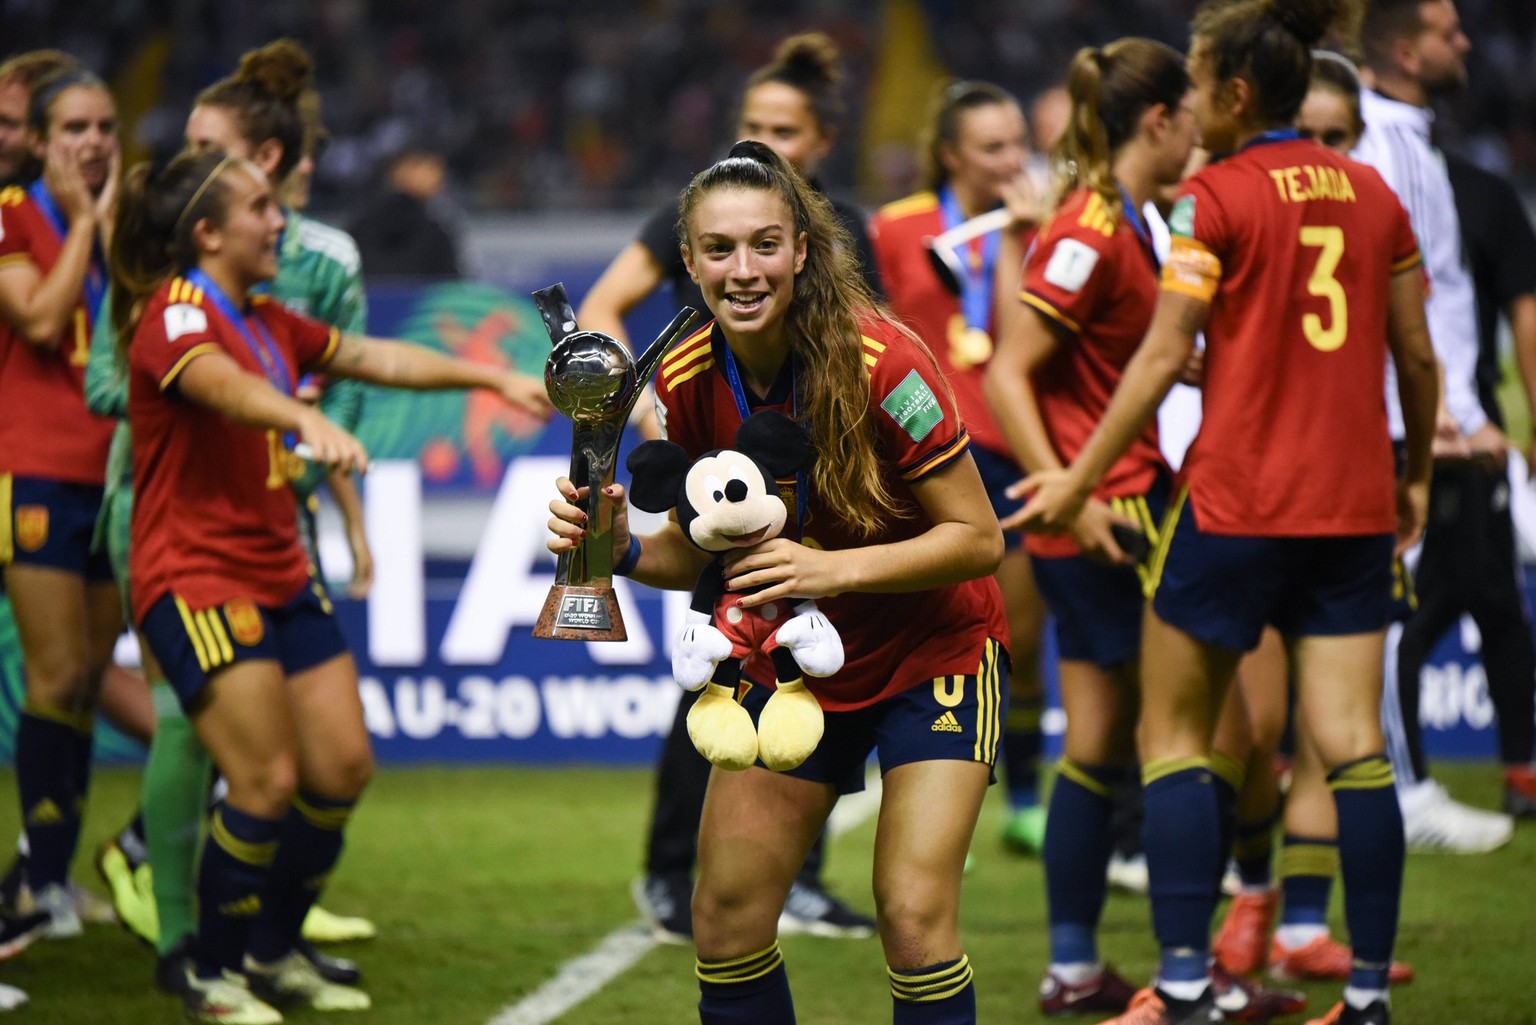 SAN JOSE, Costa Rica: Spain player Silvia LLORIS 8 poses with the champions trophy after the final match played between Spain and Japan for the champions trophy at the FIFA U-20 Womens World Cup Costa ...